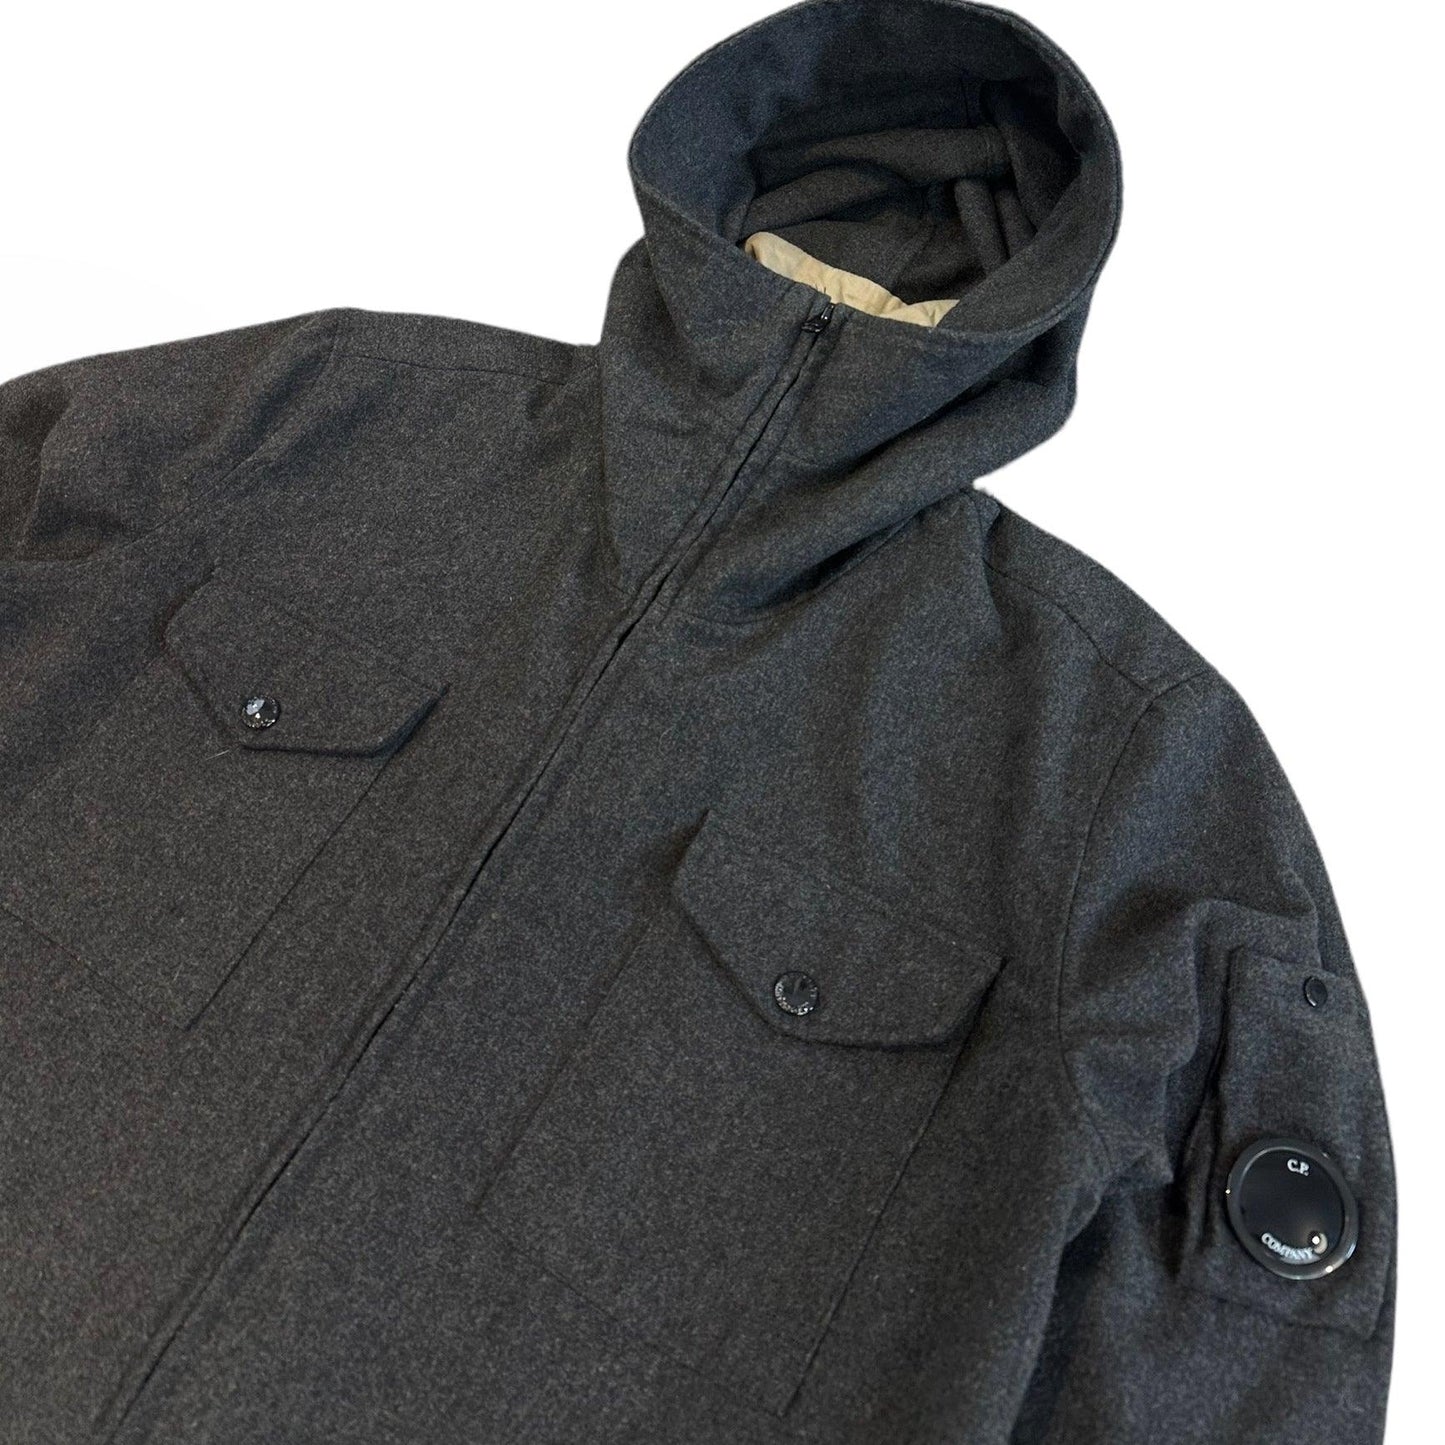 CP Company Wool Double Pocket Zip Up Jacket with Micro Lens - Known Source